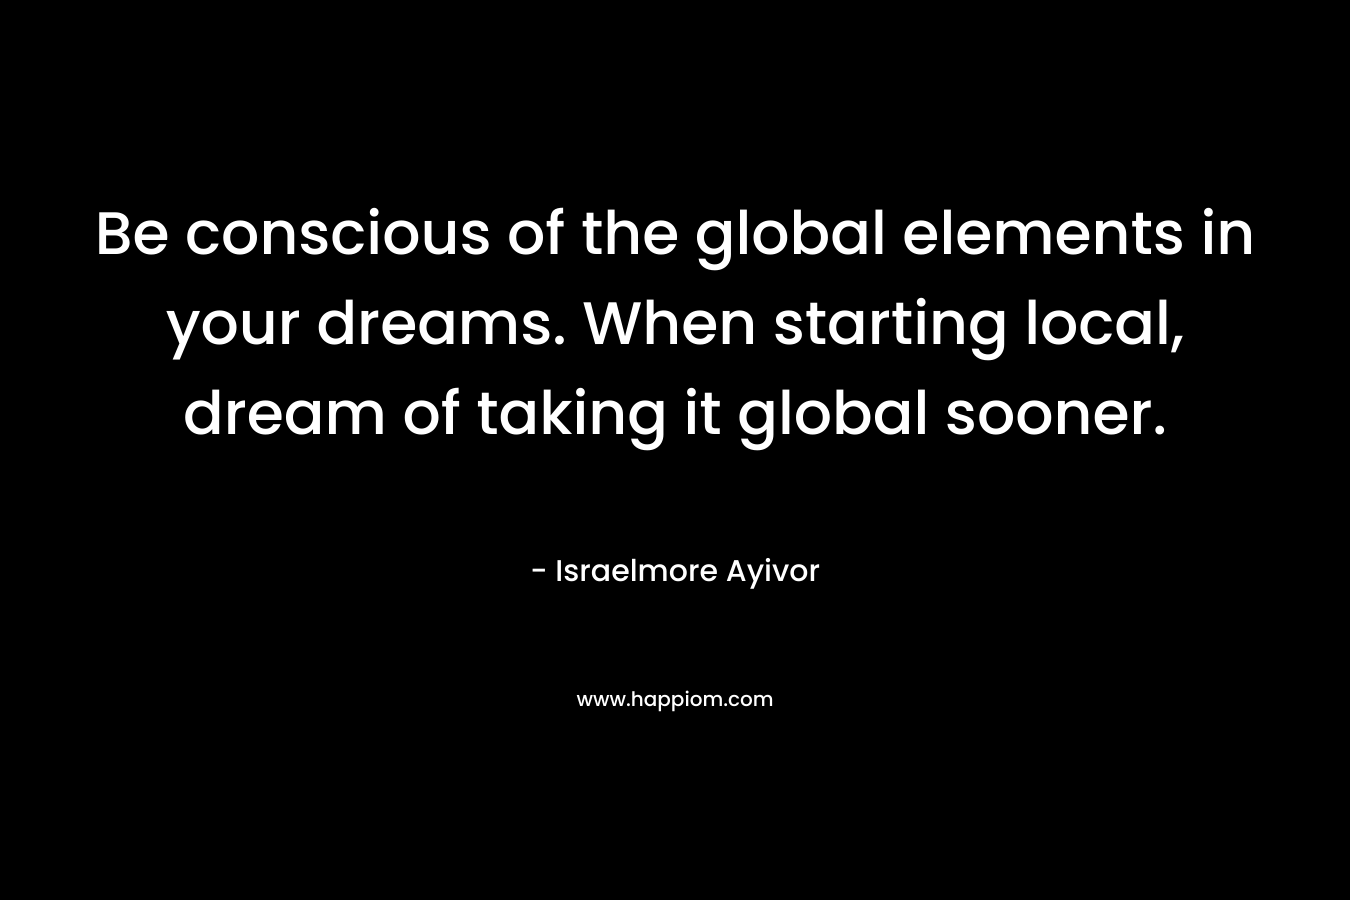 Be conscious of the global elements in your dreams. When starting local, dream of taking it global sooner.